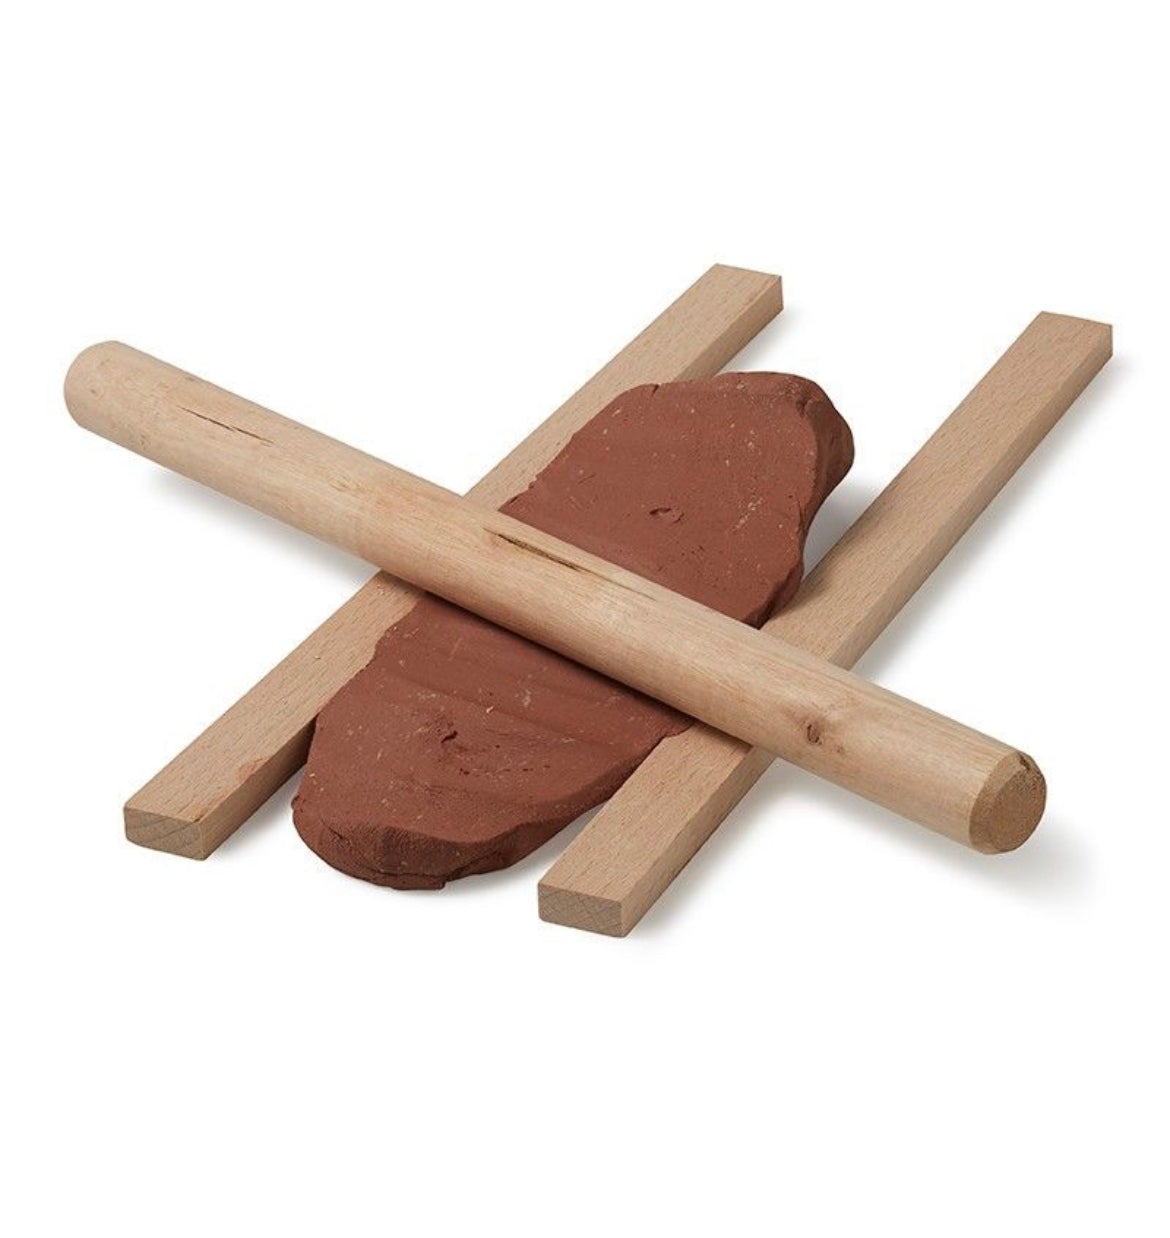 Clay Tools | Clay Roller & Slats | Wooden Clay Tool - Alder & Alouette